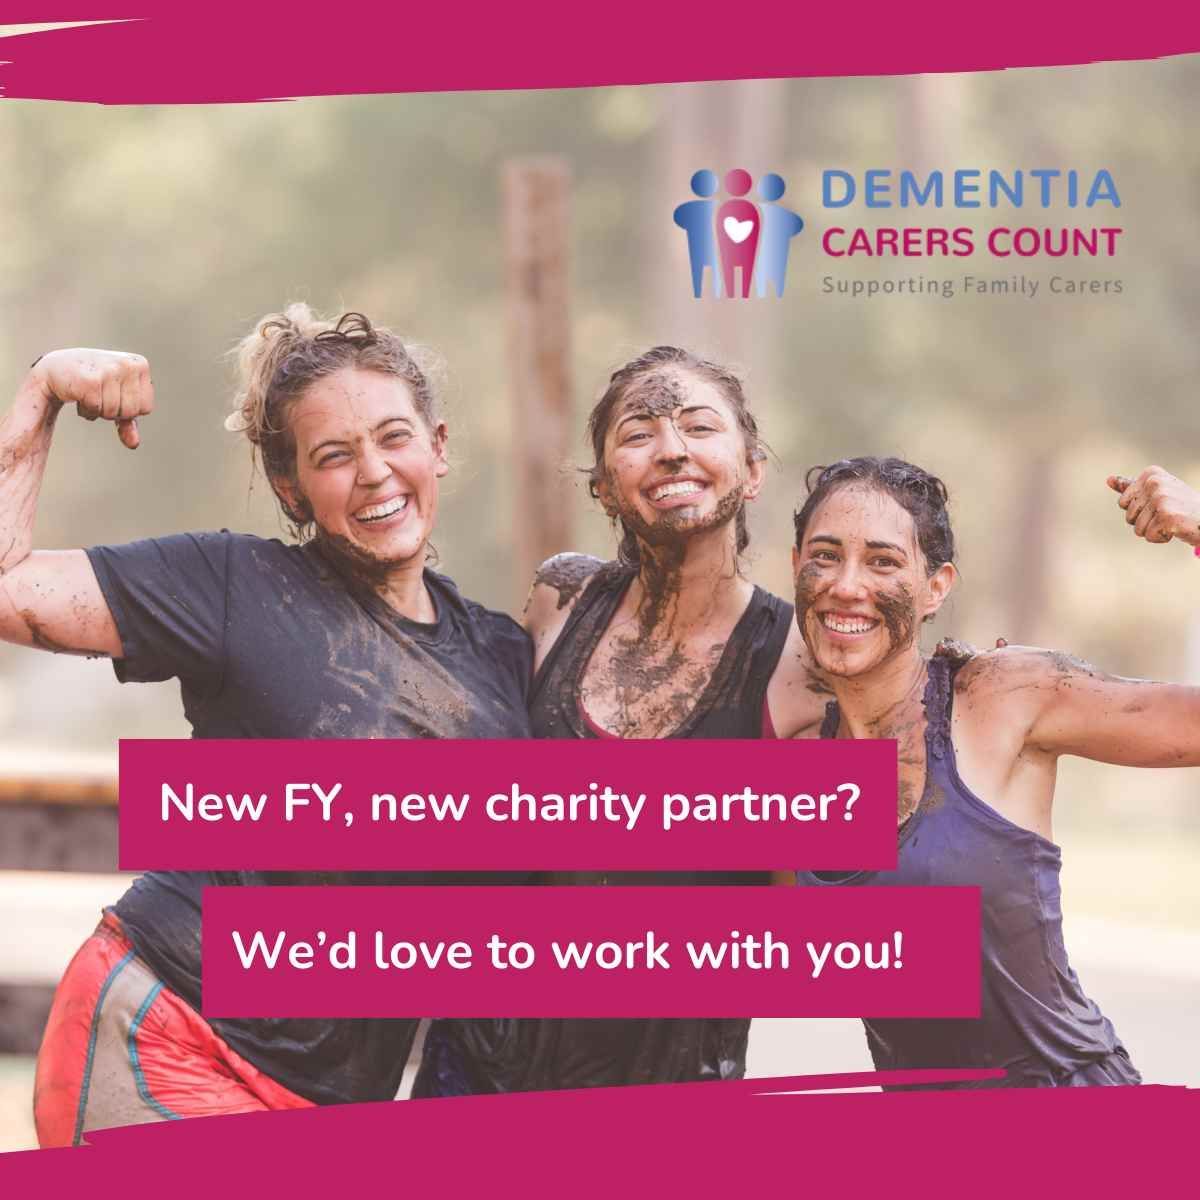 Calling all businesses! Looking for a new charity partnership as we head into the new financial year? Whether you want a one-off team challenge, or to support us all year, we have something for everyone. We'd love to chat! fundraising@dementiacarers.org.uk

#dementiacare #charity